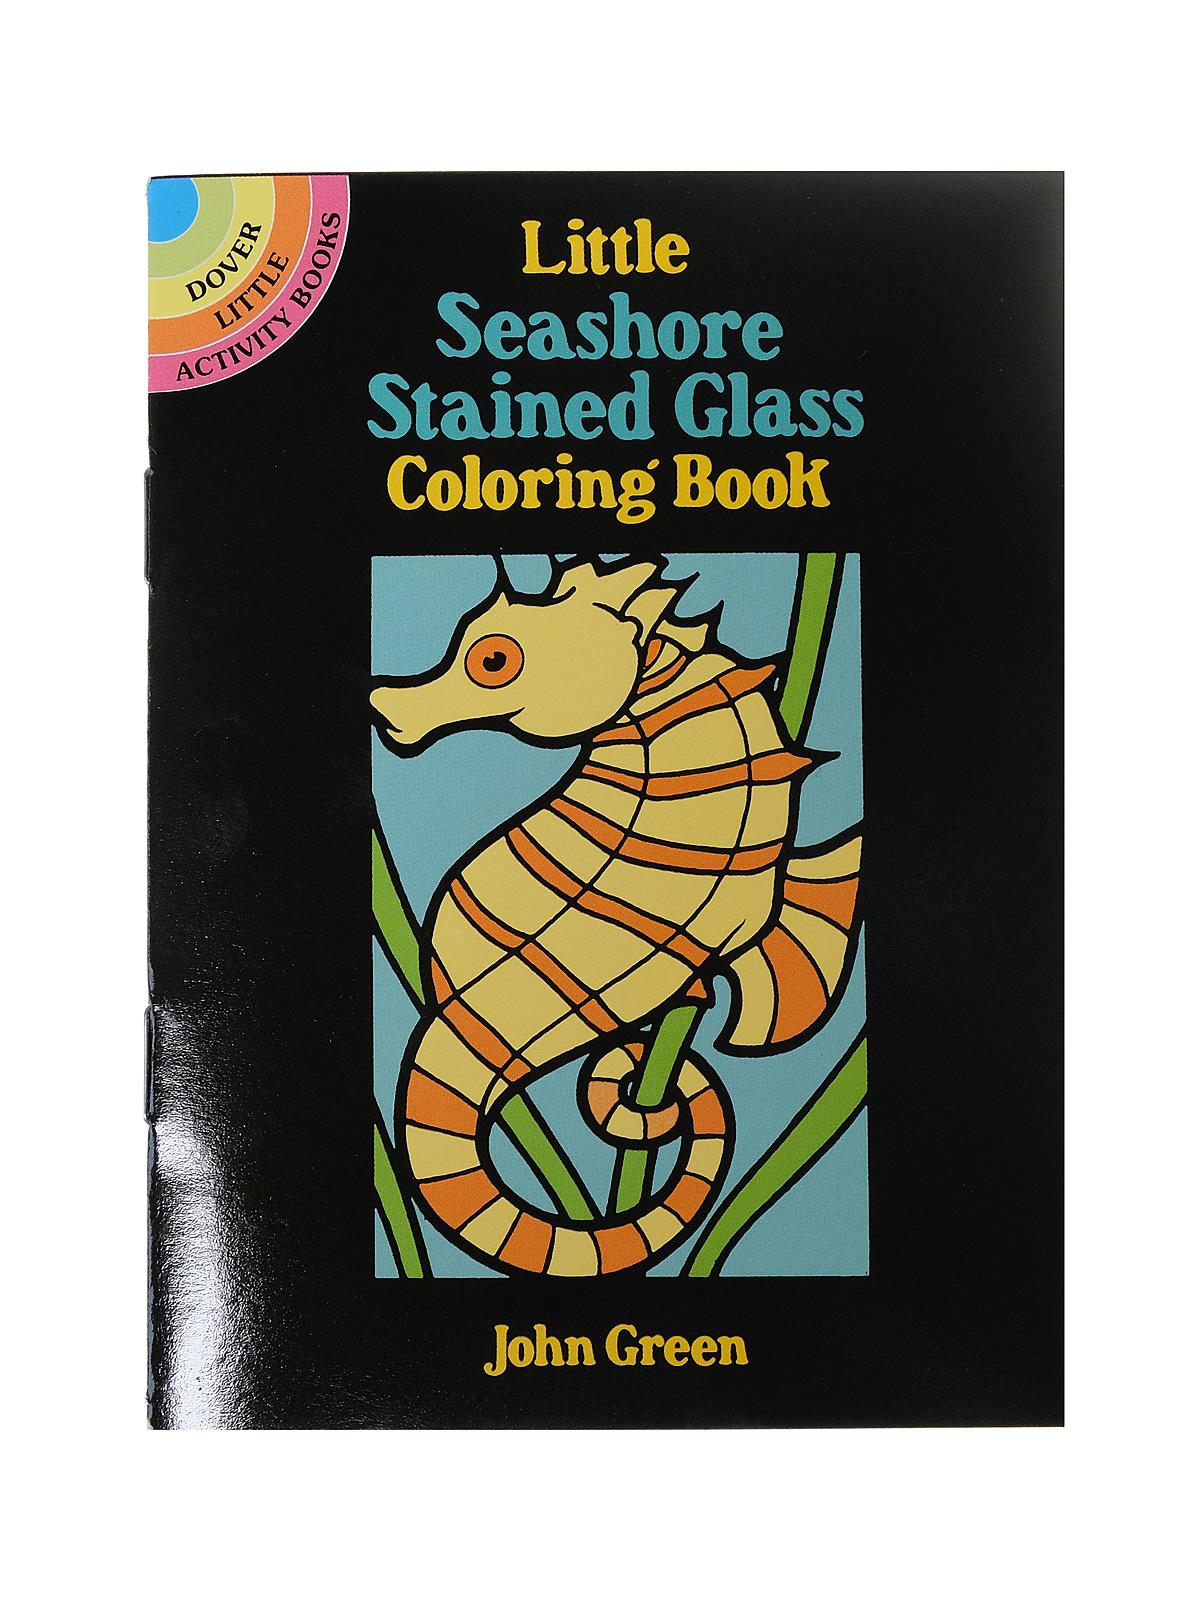 Little Seashore Stained Glass Coloring Book Little Seashore Stained Glass Coloring Book